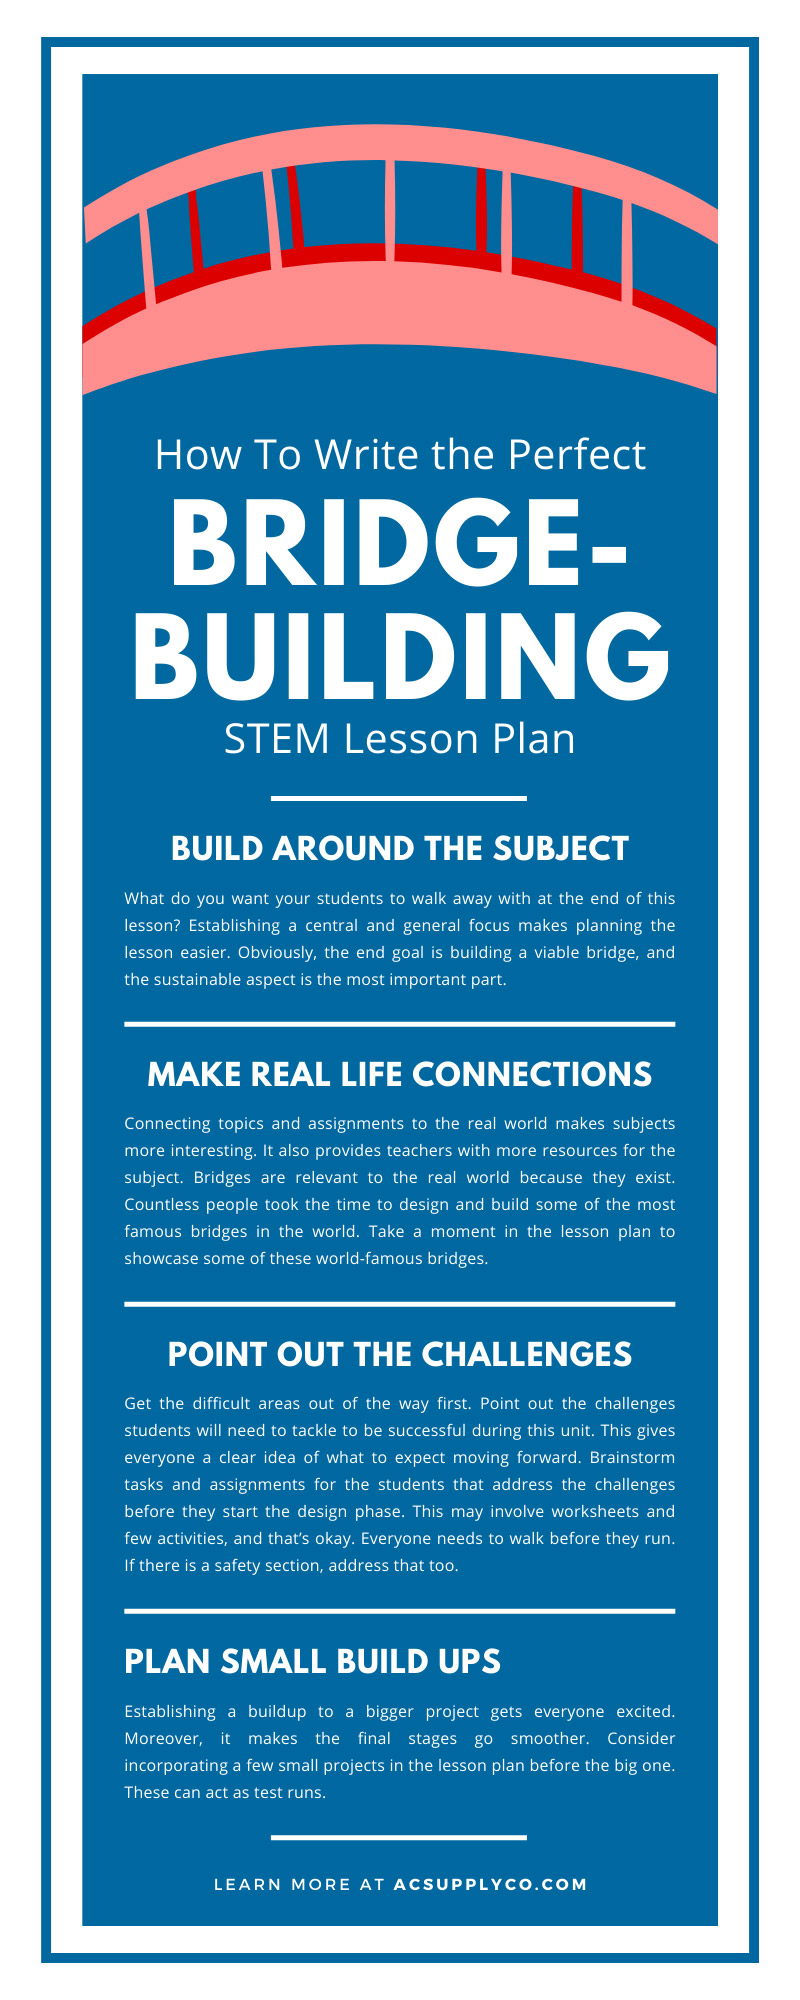 How To Write the Perfect Bridge-Building STEM Lesson Plan
